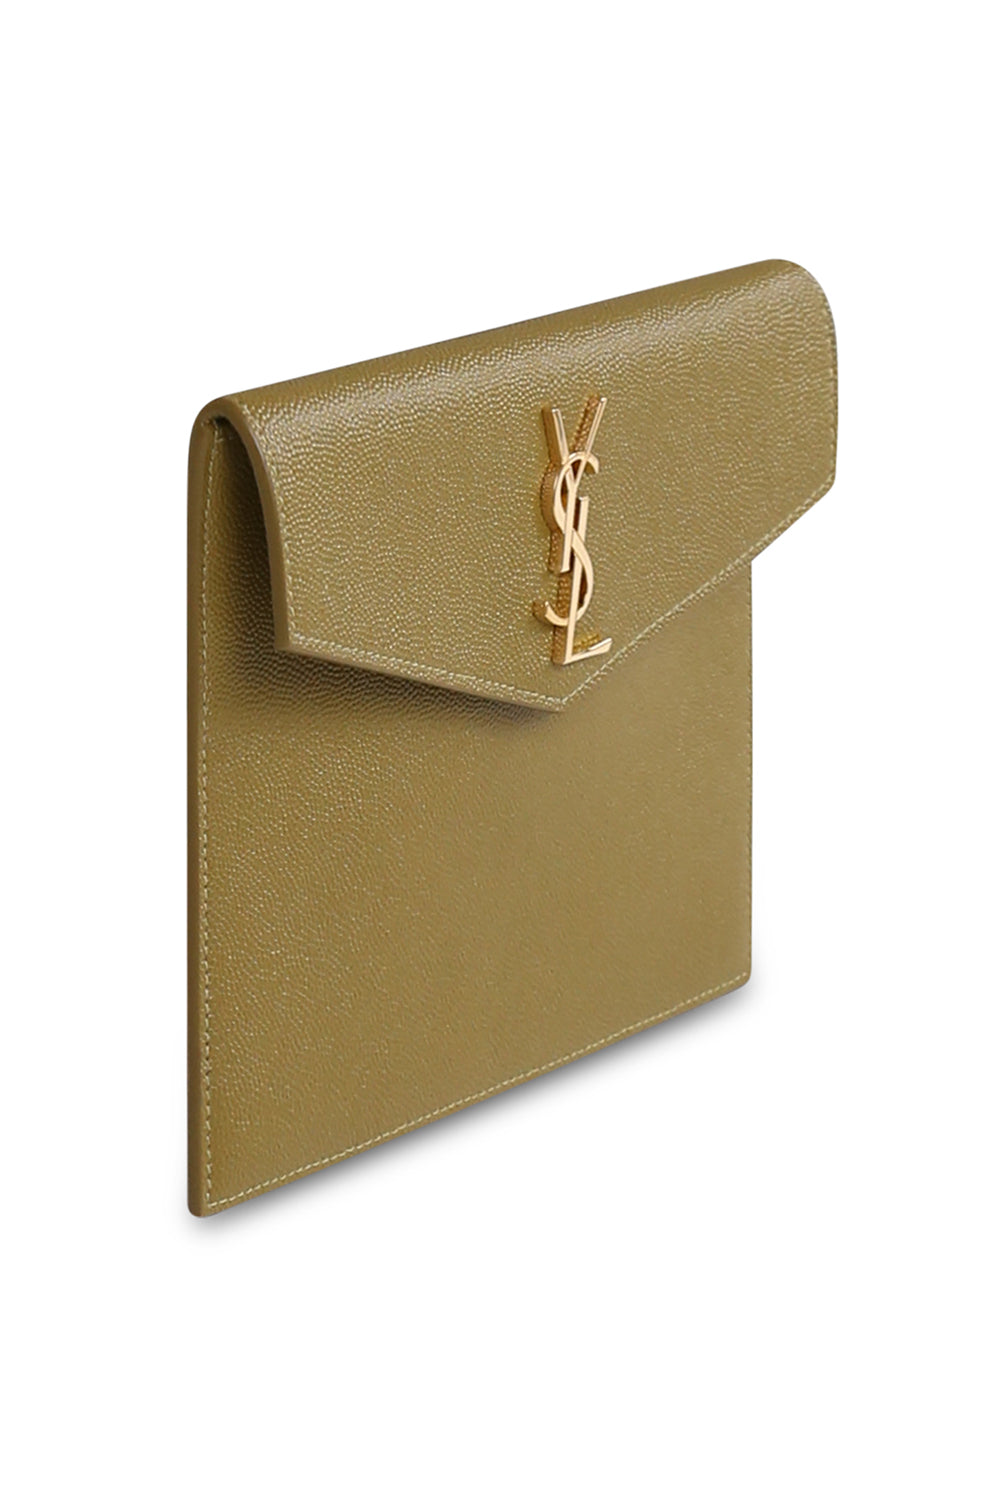 SAINT LAURENT BAGS GREEN SMALL UPTOWN POUCH OLIVE/GOLD